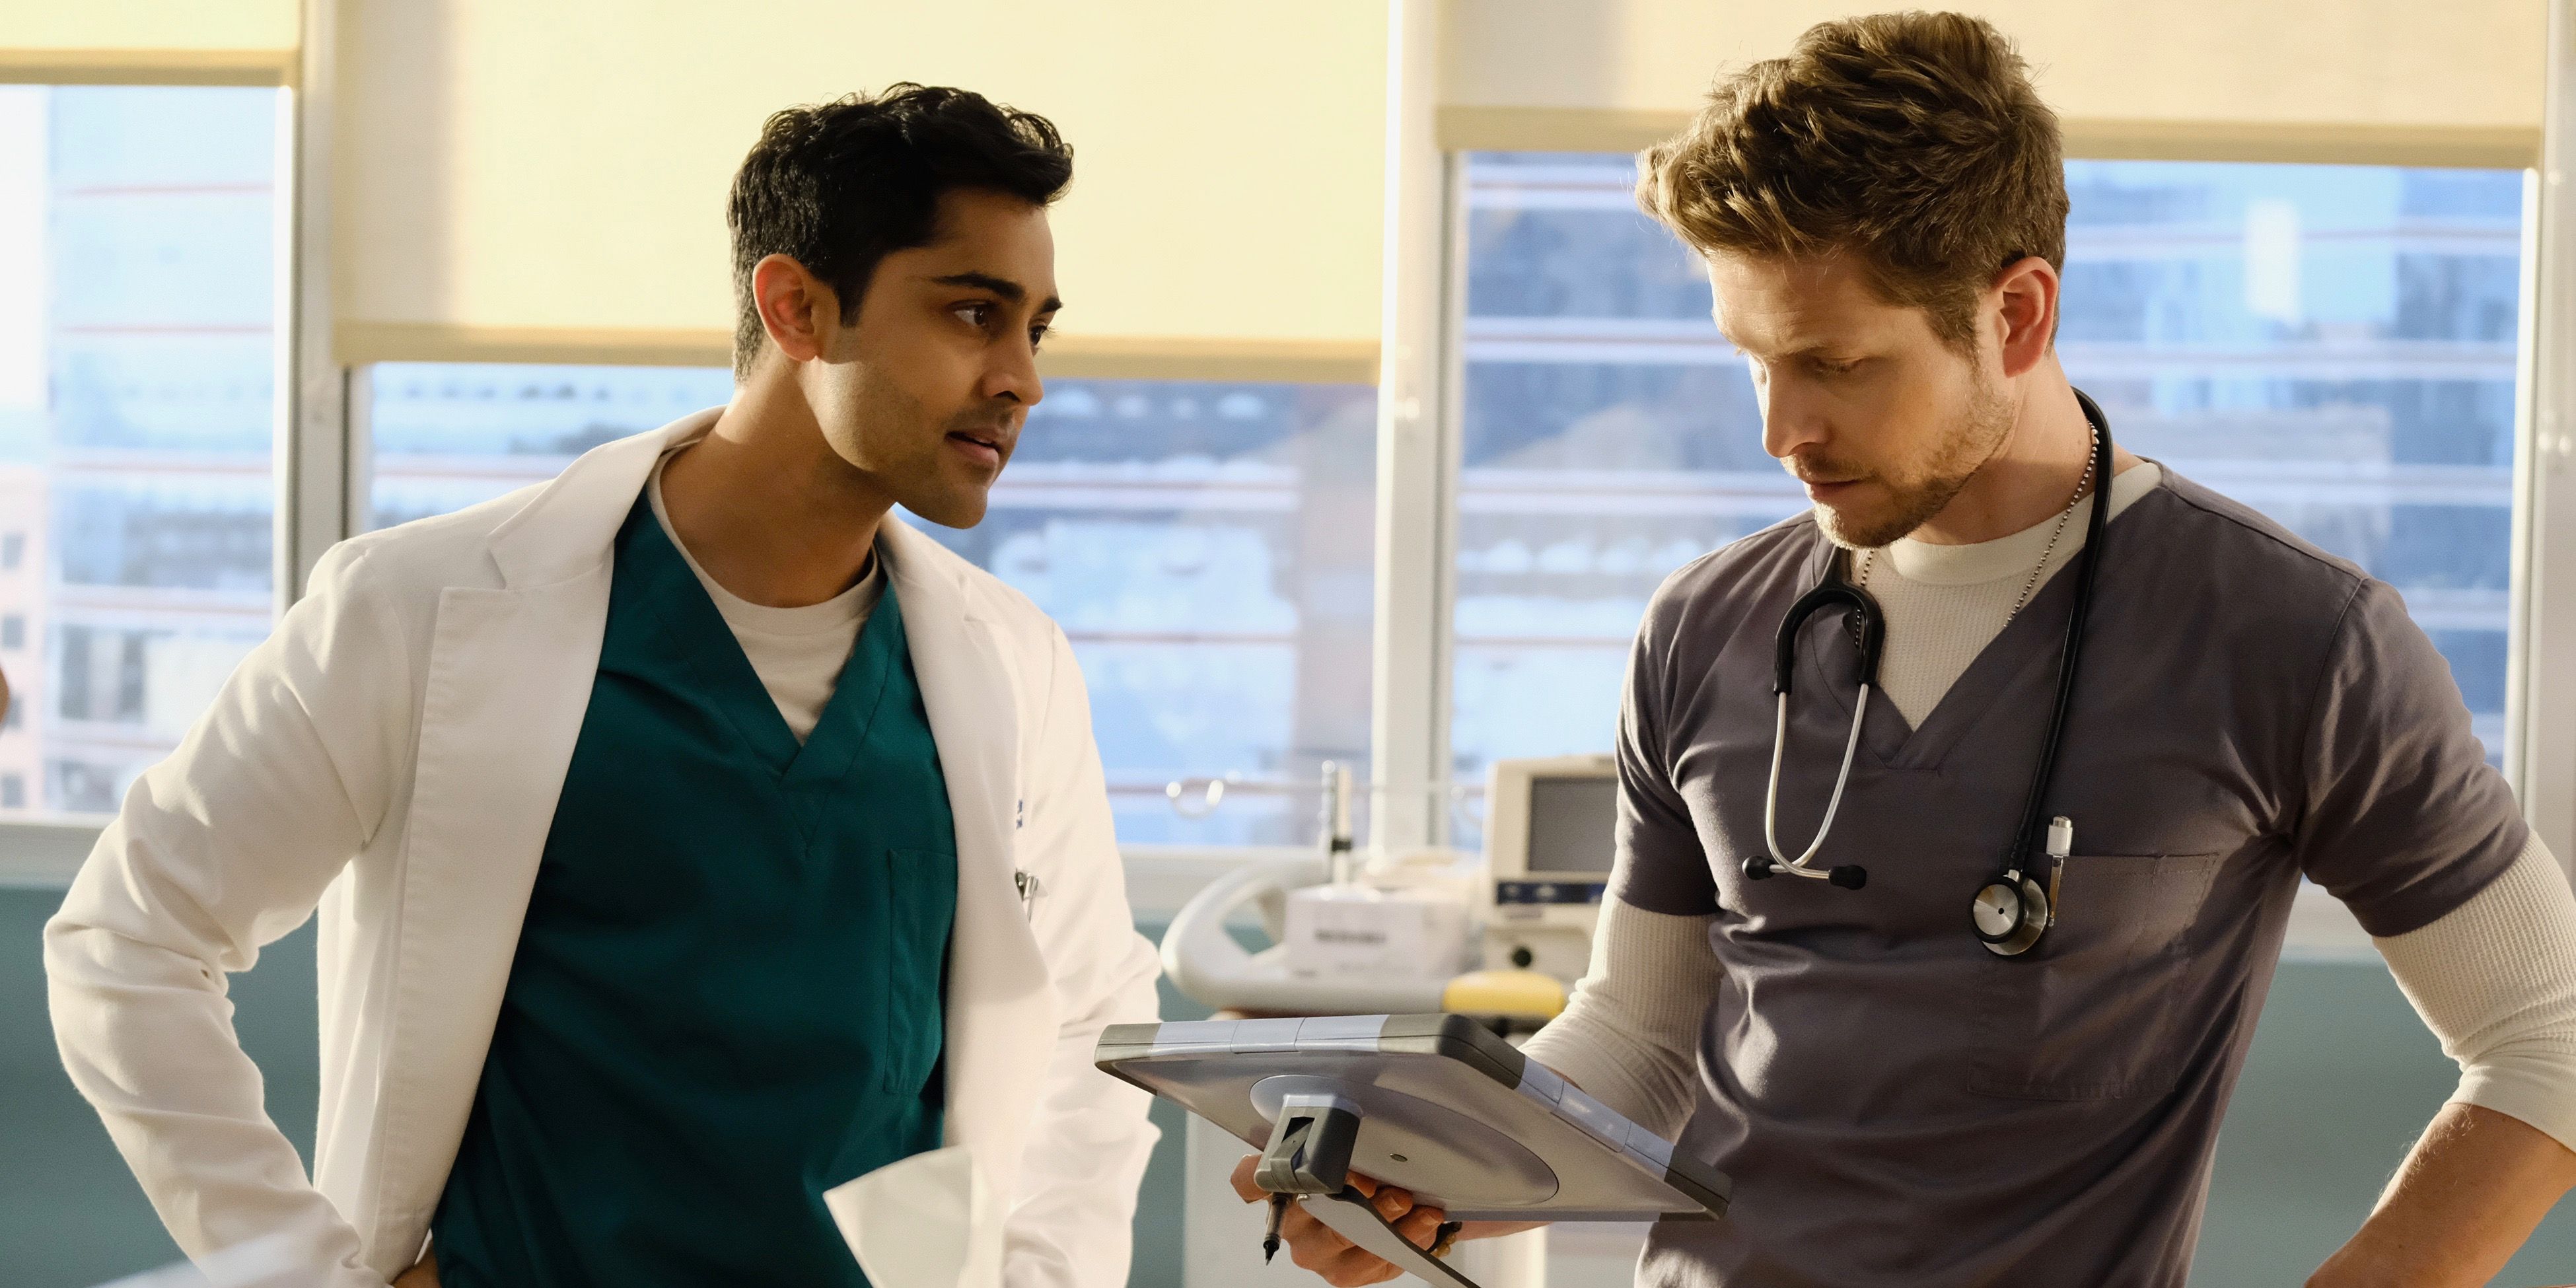 Two doctors talking in a scene from The Resident.